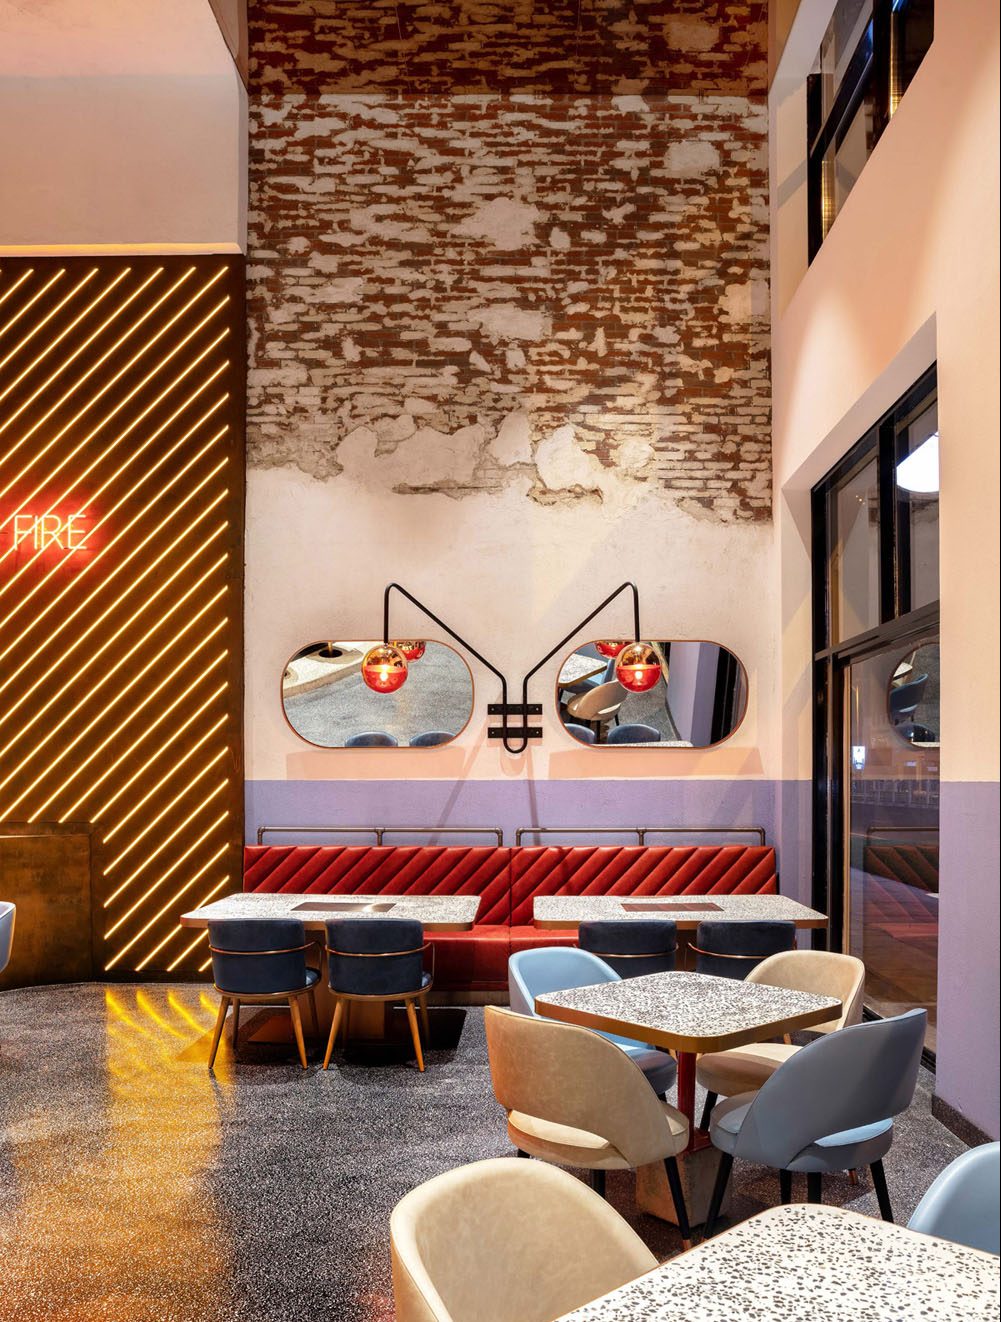 4Space, AtmosFire restaurant design project images for SBID interior design blog, Project of the Week